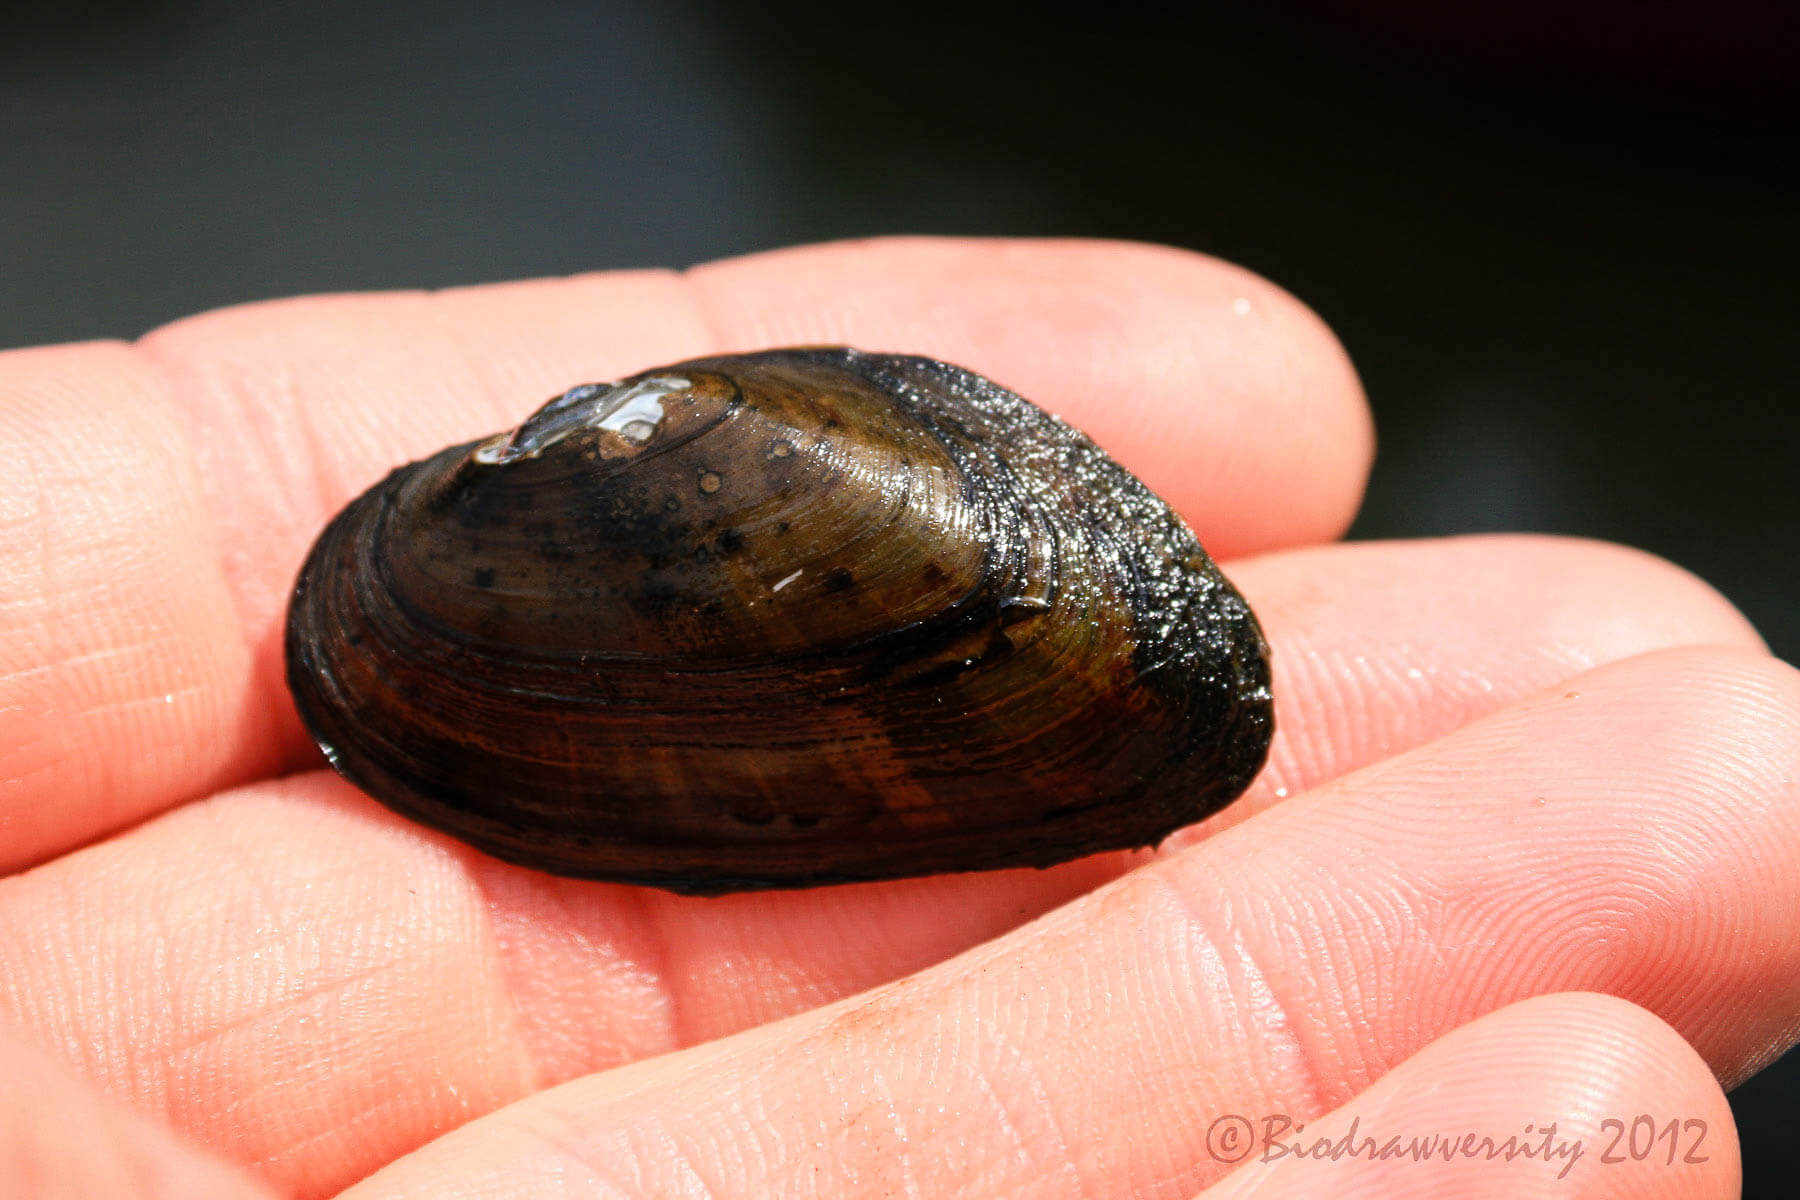 The dwarf wedge mussel has a dark-brown coloring.